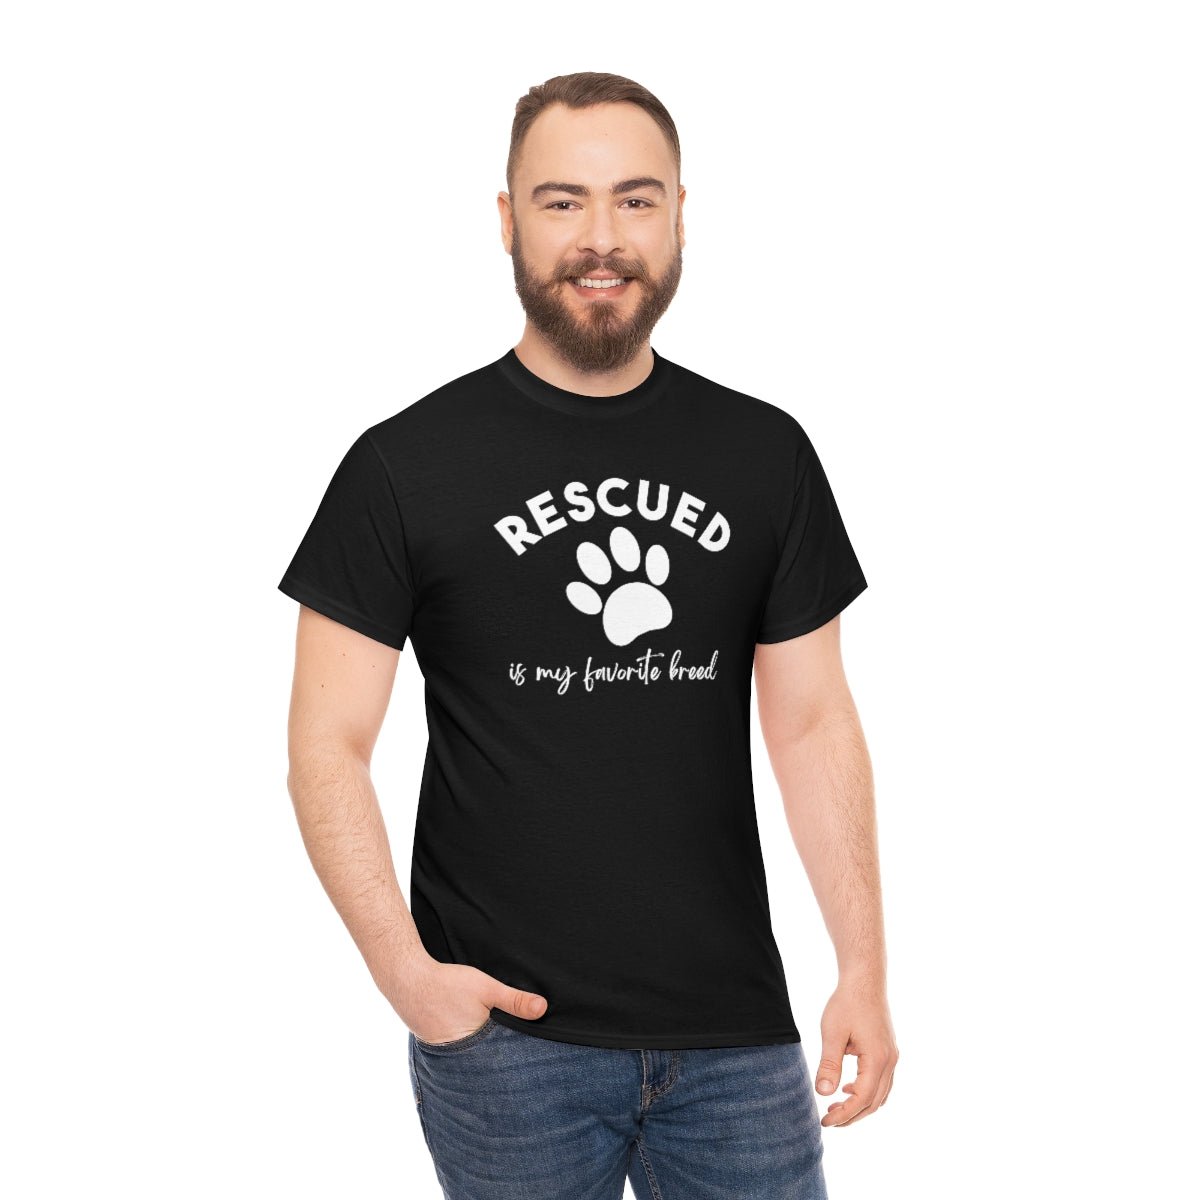 Rescued Is My Favorite Breed Paw | Text Tees - Detezi Designs-74124685659559777008